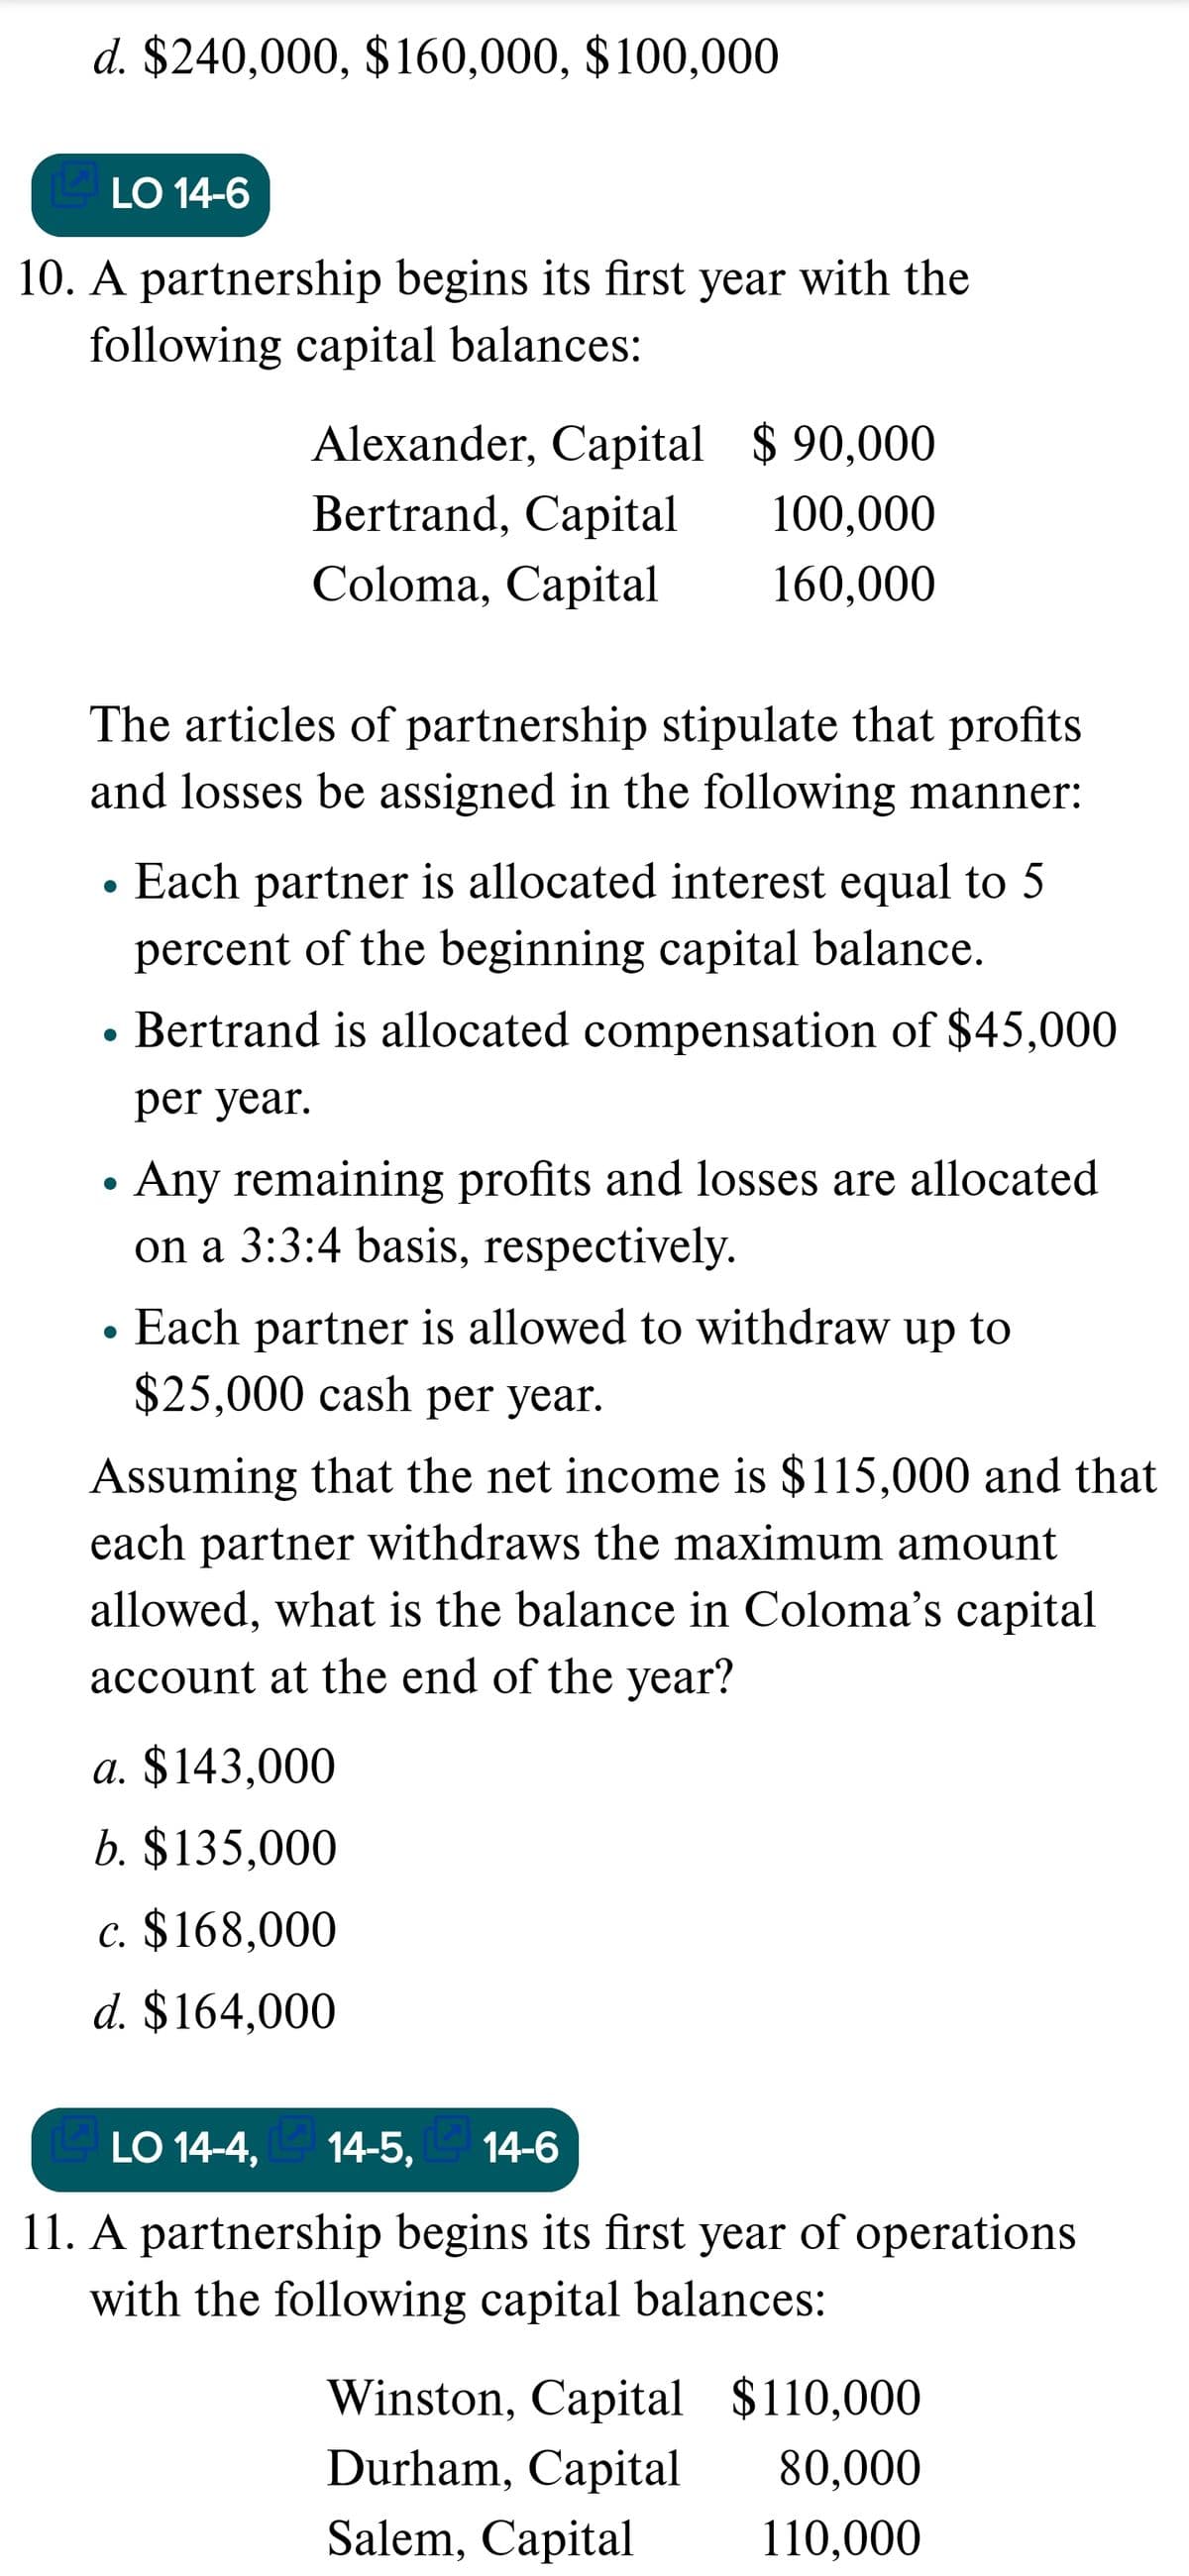 d. $240,000, $160,000, $100,000
LO 14-6
10. A partnership begins its first year with the
following capital balances:
Alexander, Capital $ 90,000
Bertrand, Capital
100,000
Coloma, Capital
160,000
The articles of partnership stipulate that profits
and losses be assigned in the following manner:
Each partner is allocated interest equal to 5
percent of the beginning capital balance.
Bertrand is allocated compensation of $45,000
per year.
Any remaining profits and losses are allocated
on a 3:3:4 basis, respectively.
Each partner is allowed to withdraw up to
$25,000 cash per year.
Assuming that the net income is $115,000 and that
each partner withdraws the maximum amount
allowed, what is the balance in Coloma's capital
account at the end of the year?
a. $143,000
b. $135,000
c. $168,000
d. $164,000
LO 14-4, 14-5,
14-6
11. A partnership begins its first year of operations
with the following capital balances:
Winston, Capital $110,000
Durham, Capital
80,000
Salem, Capital
110,000
